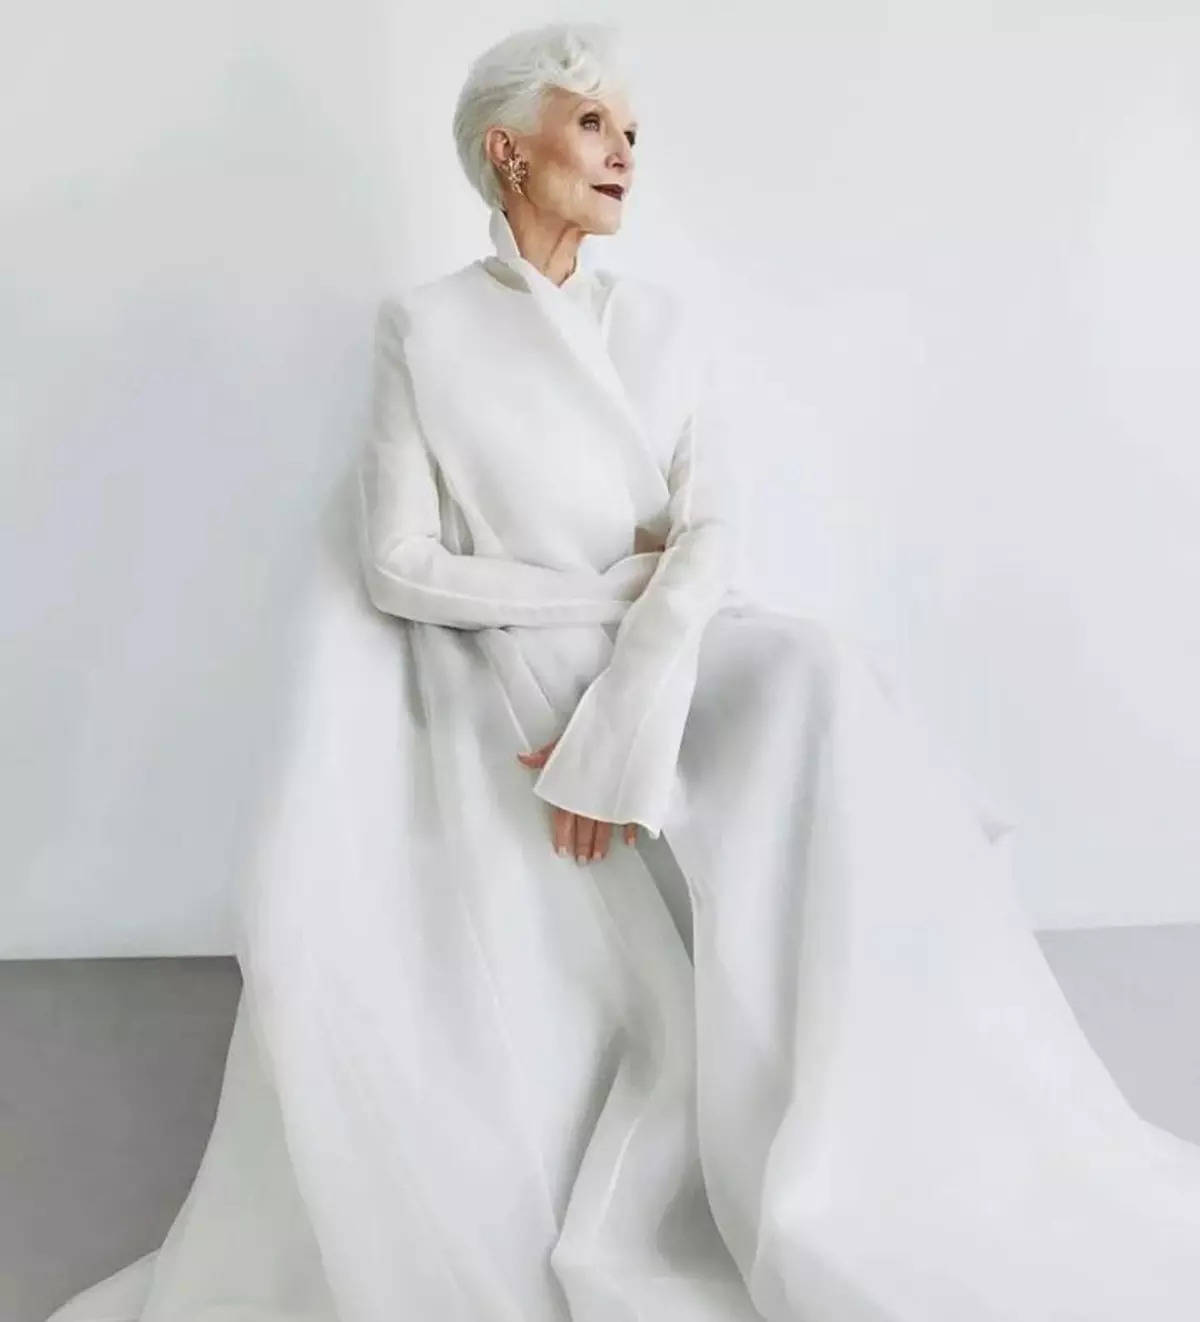 ​Nothing shakes the smiling heart of this 74-year-old Maye Musk​